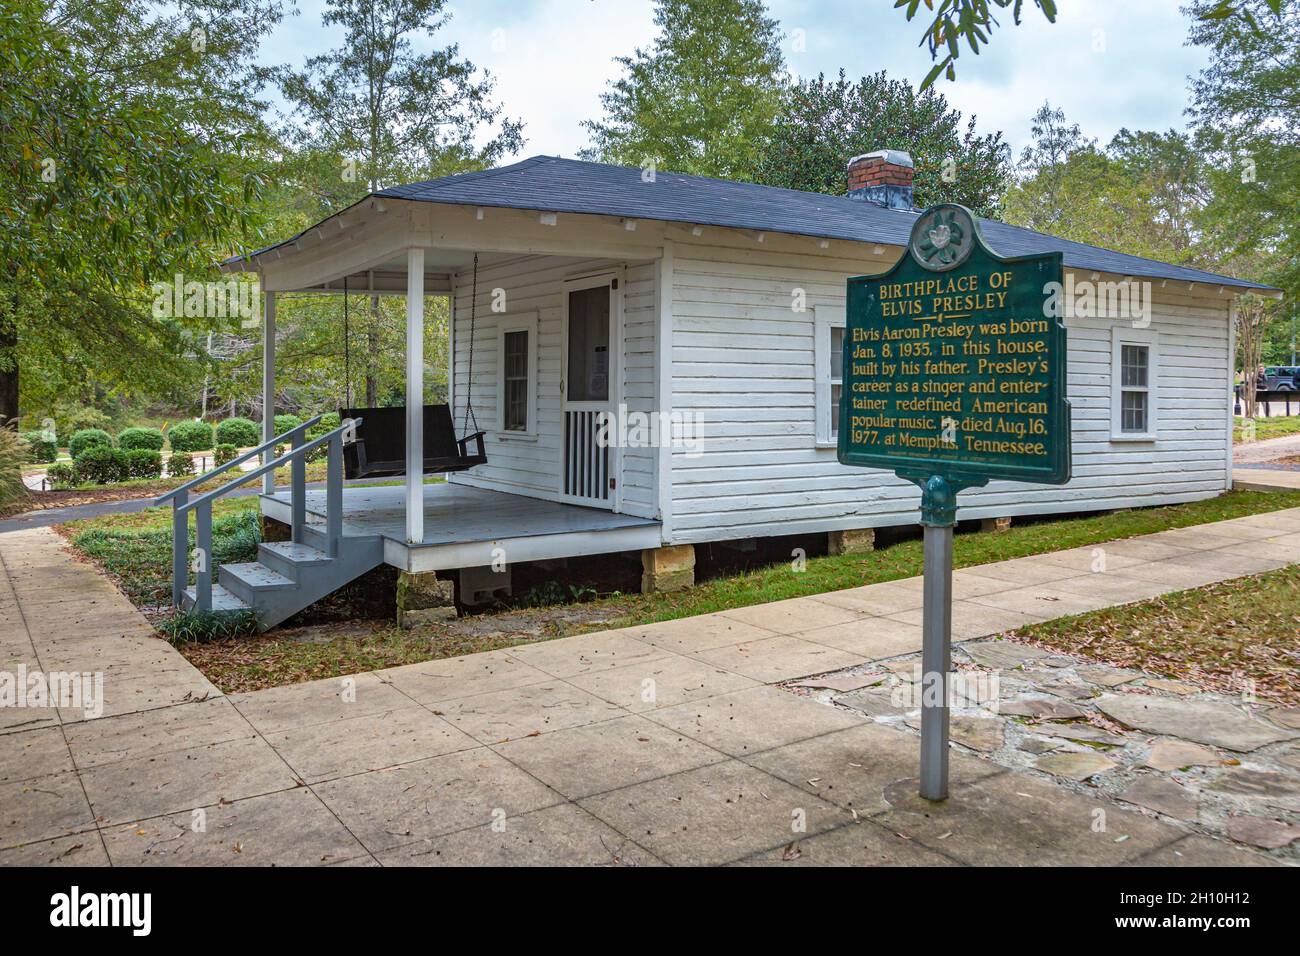 Home where Elvis Presley was born at the Elvis Presley Birthplace and Museum in Tupelo, Mississippi Stock Photo